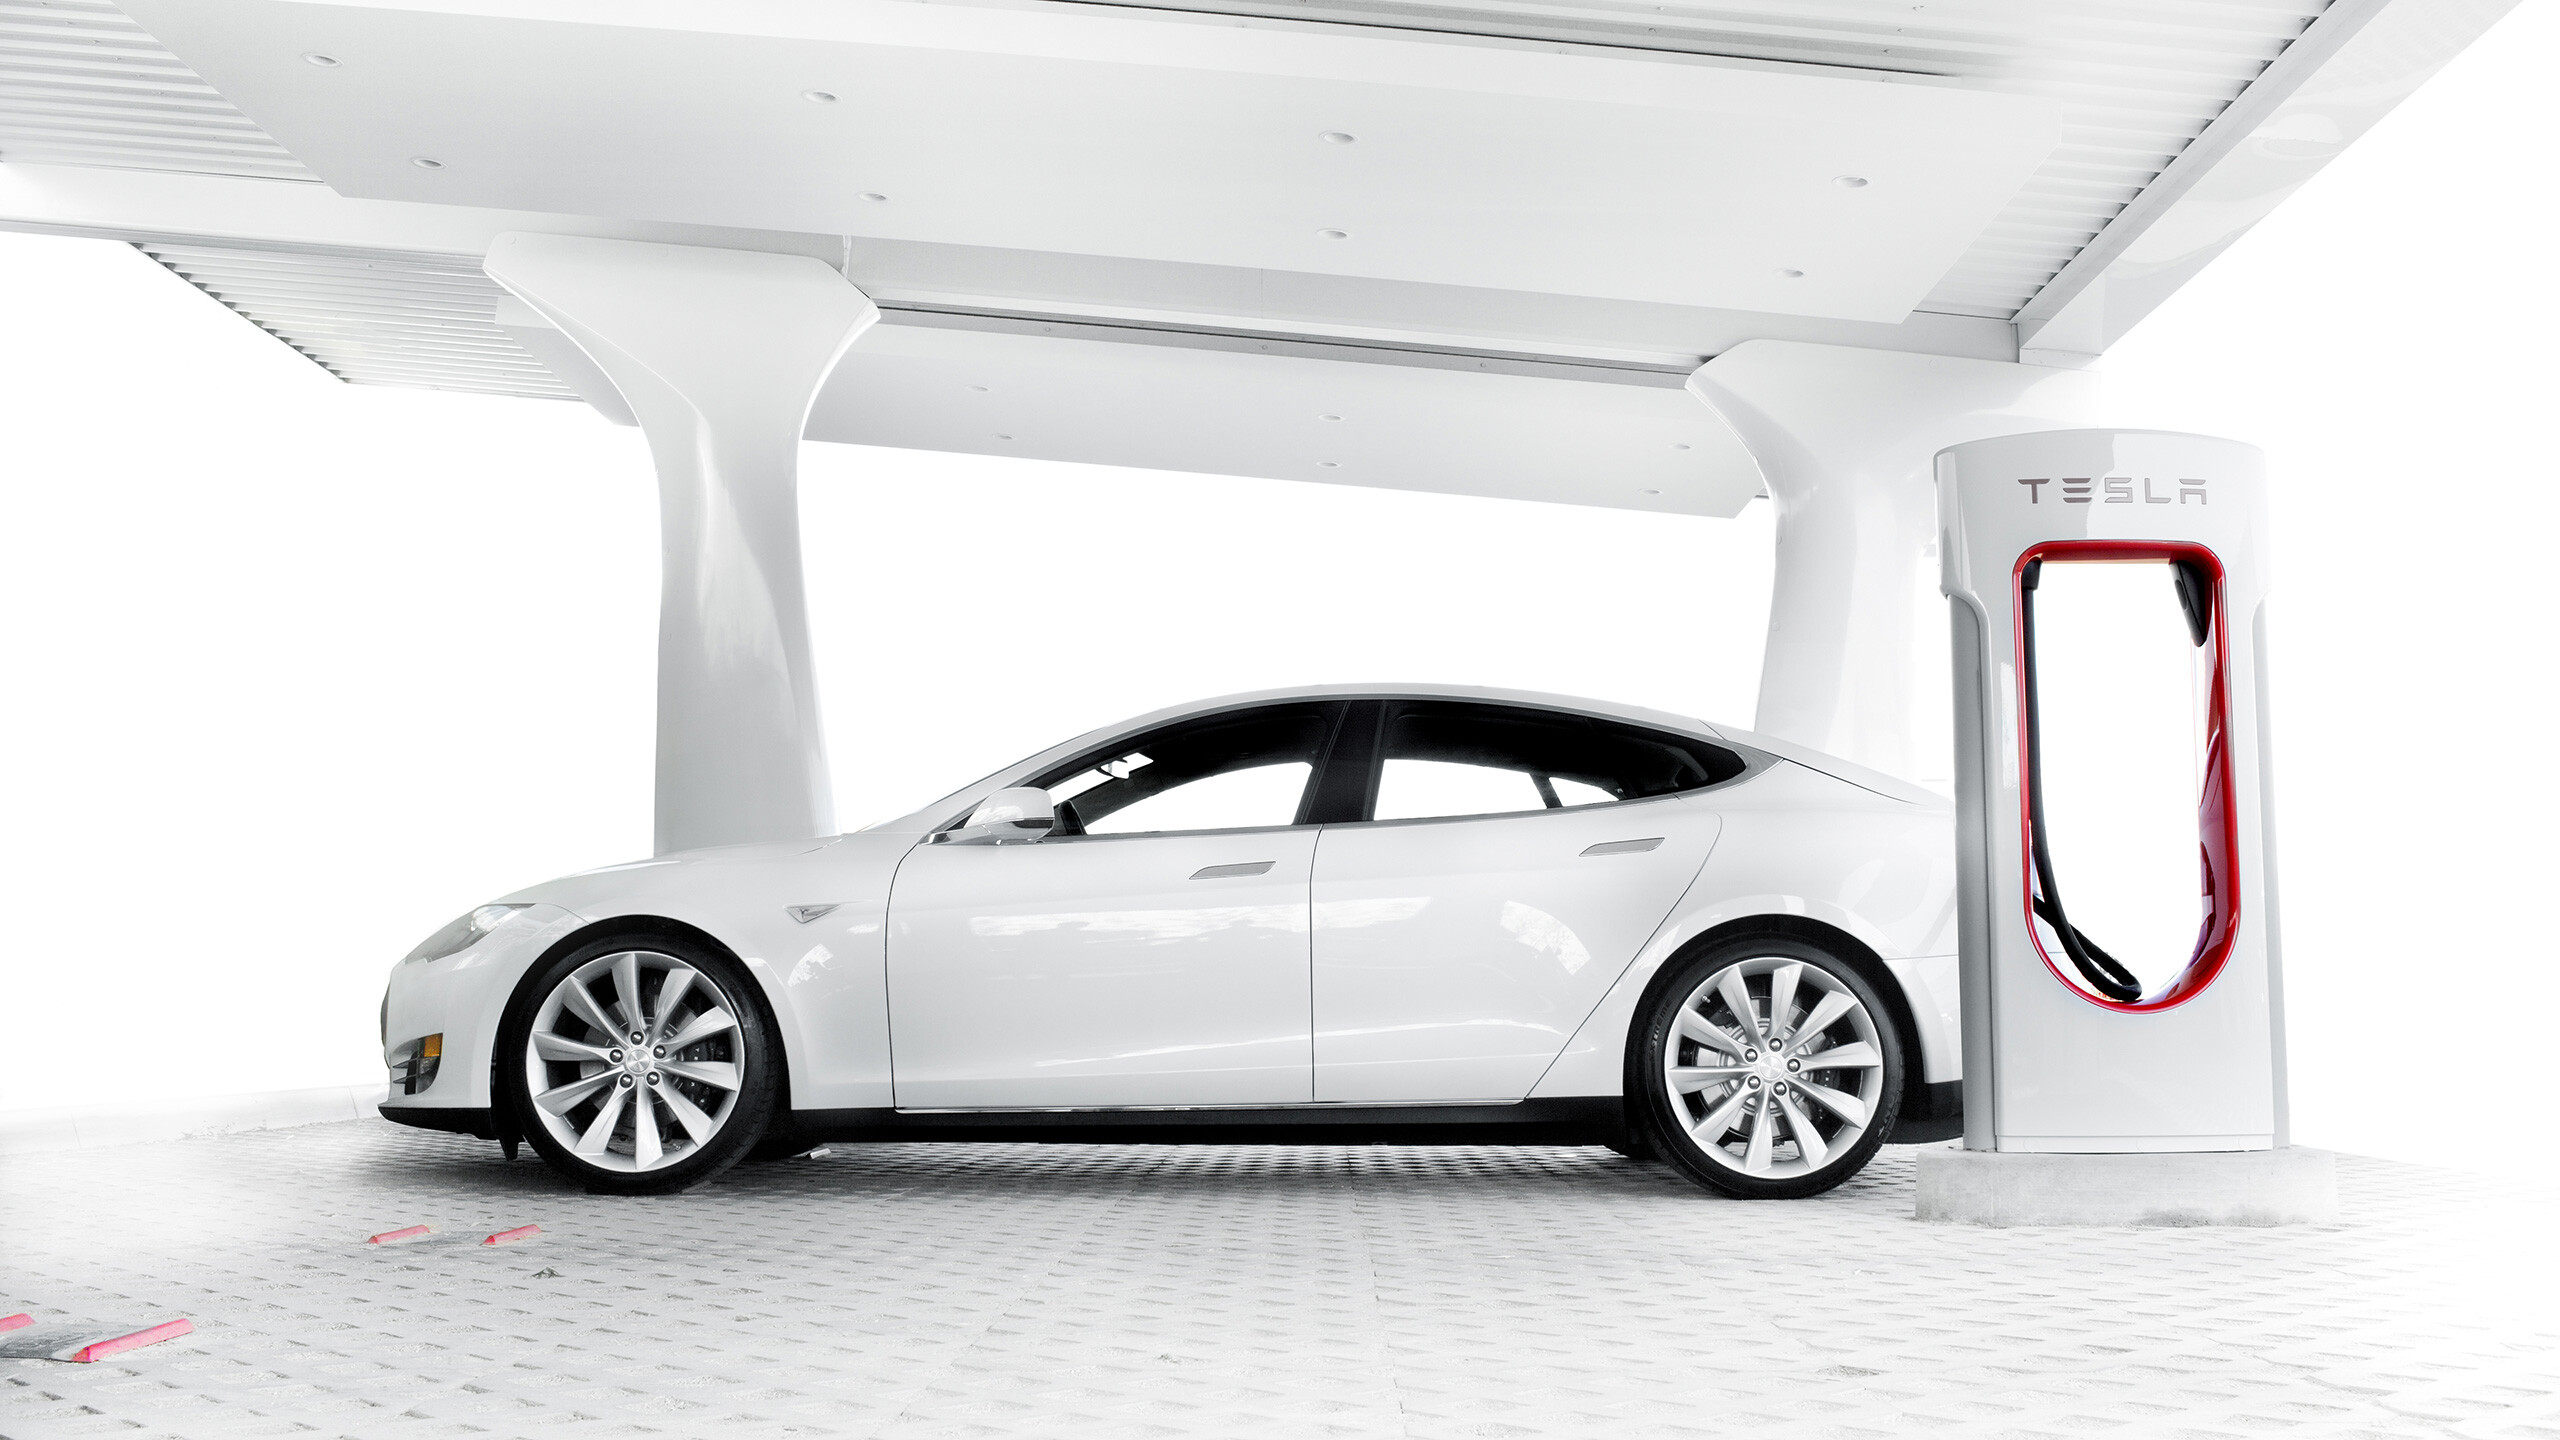 Tesla: An electric vehicle manufacturer and clean energy company, Elon Musk. 2560x1440 HD Wallpaper.